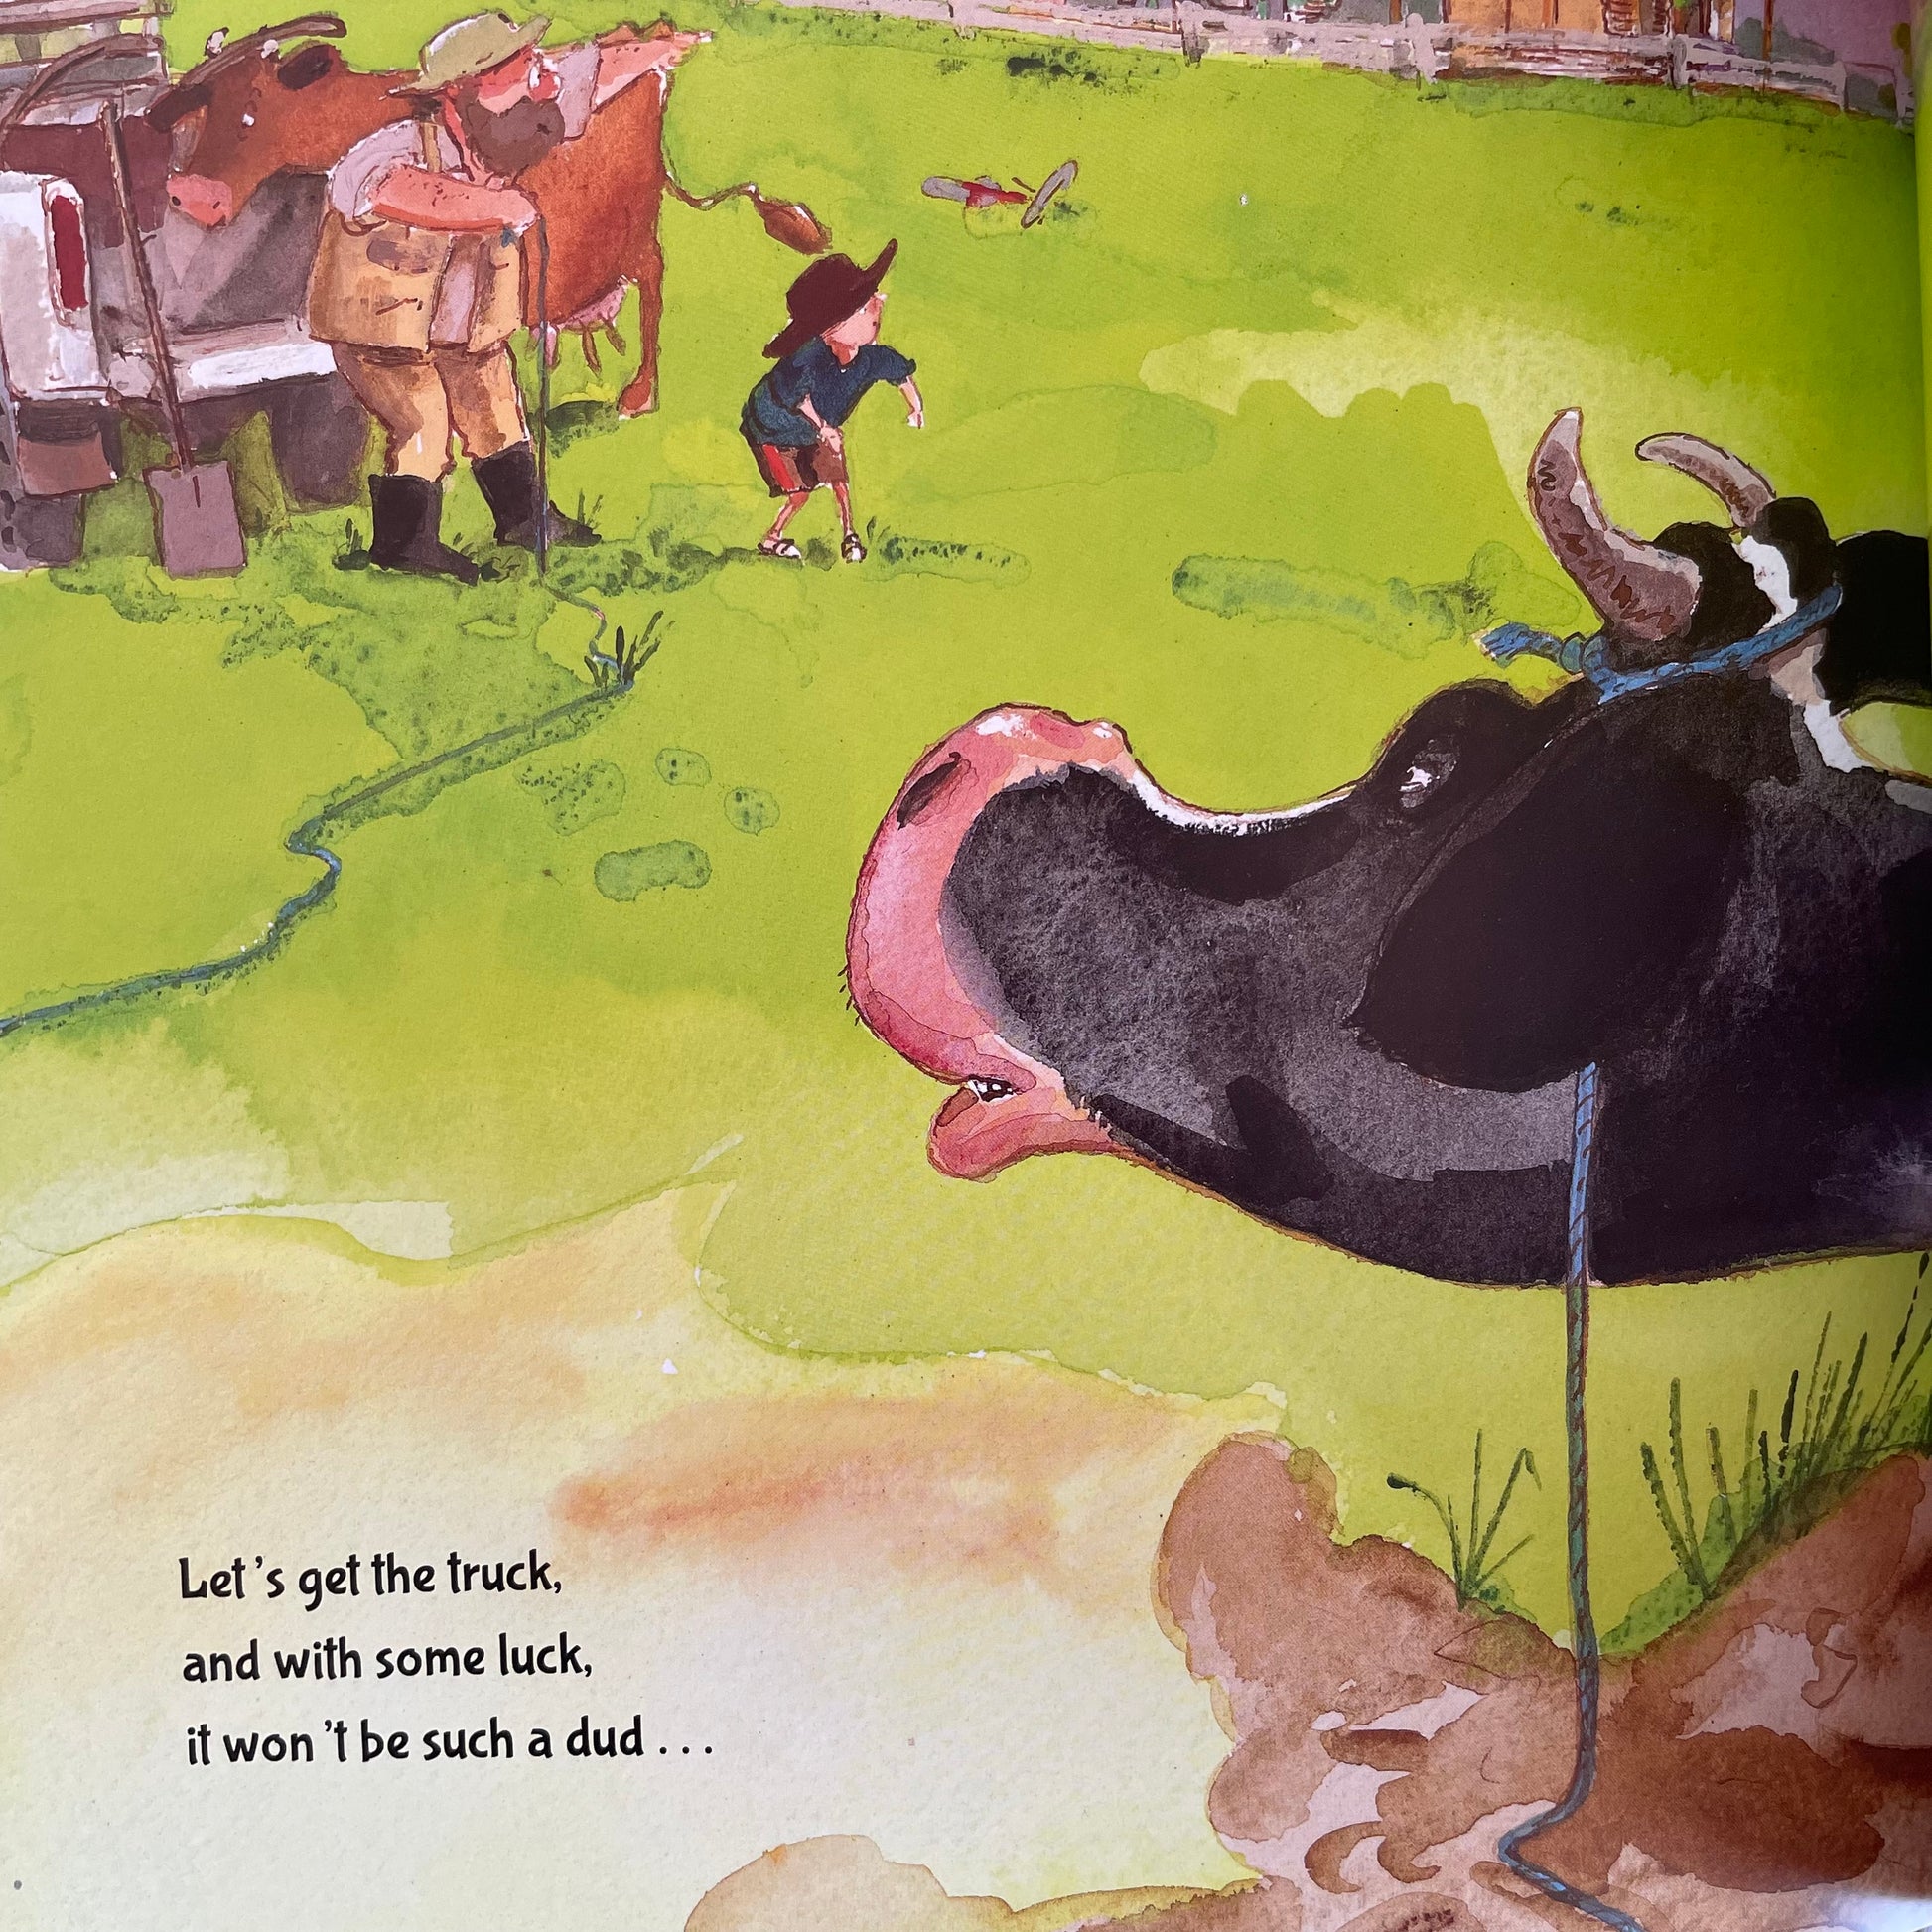 Inside pages of the book showing a cow looking at a farmer and a small child as the ponder how to get the cow out of the muck.